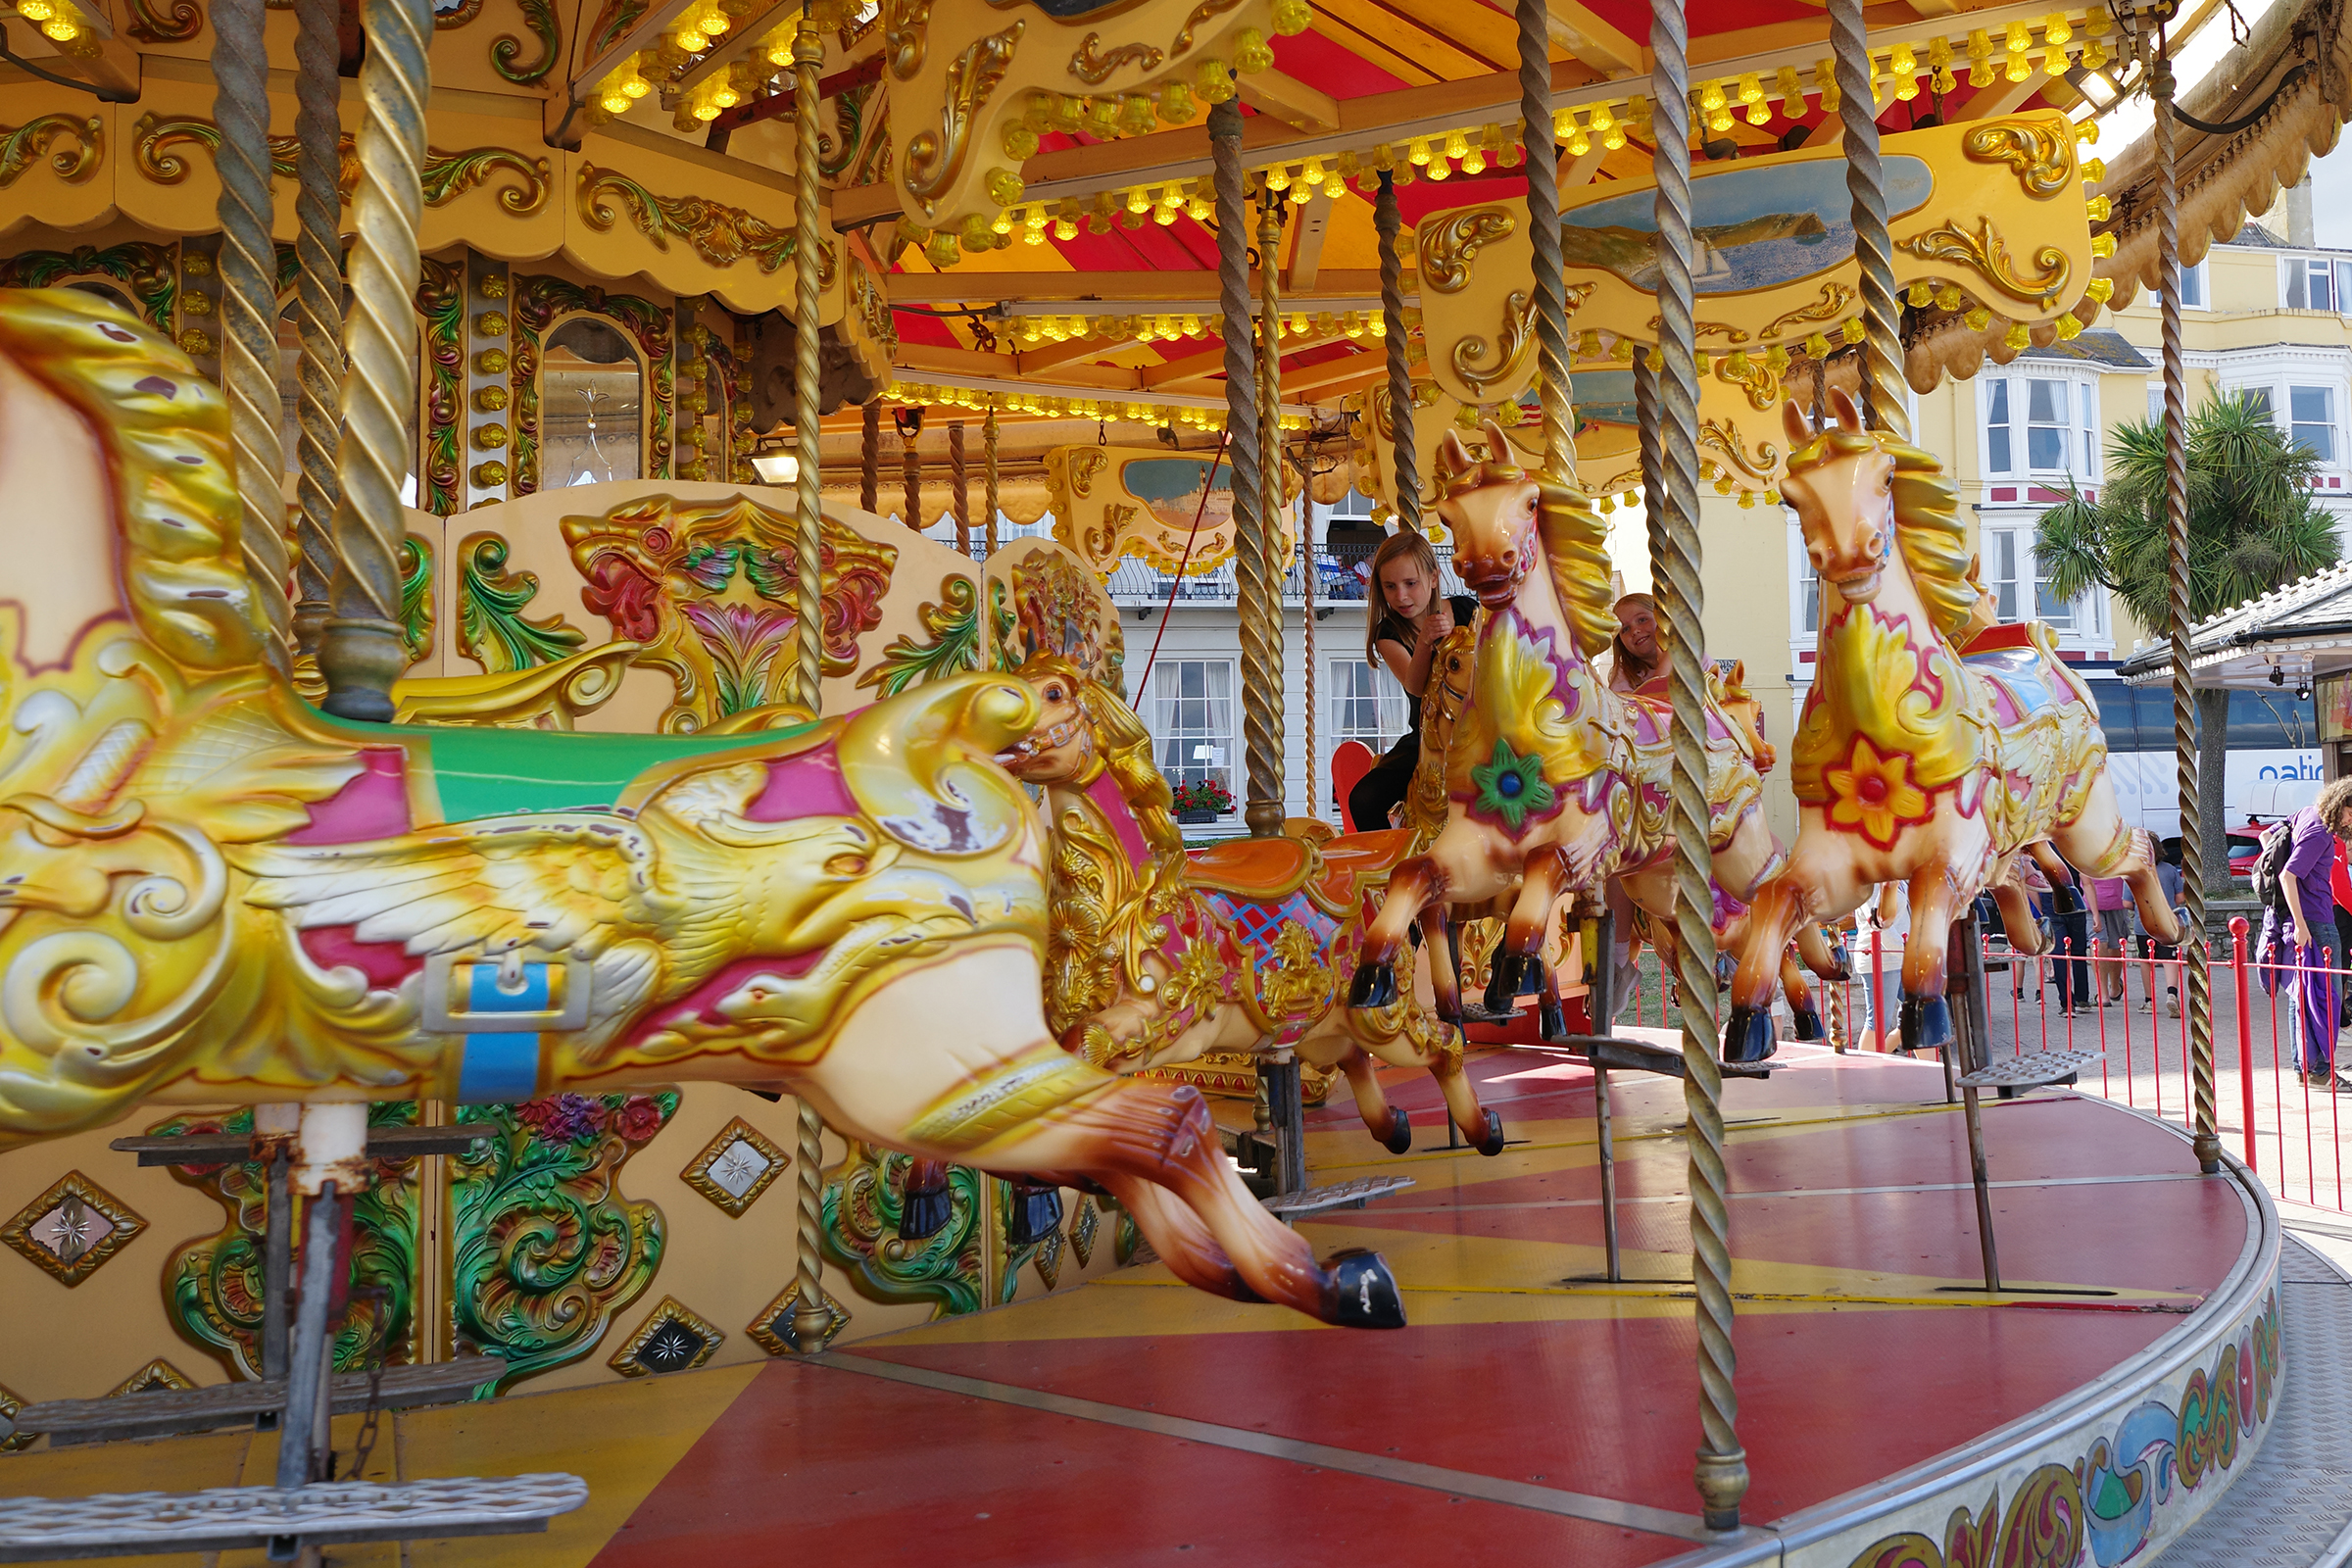 A shot of a merry-go-round taken with the Pentax K-3 III camera, f/4, 1/640, ISO 400